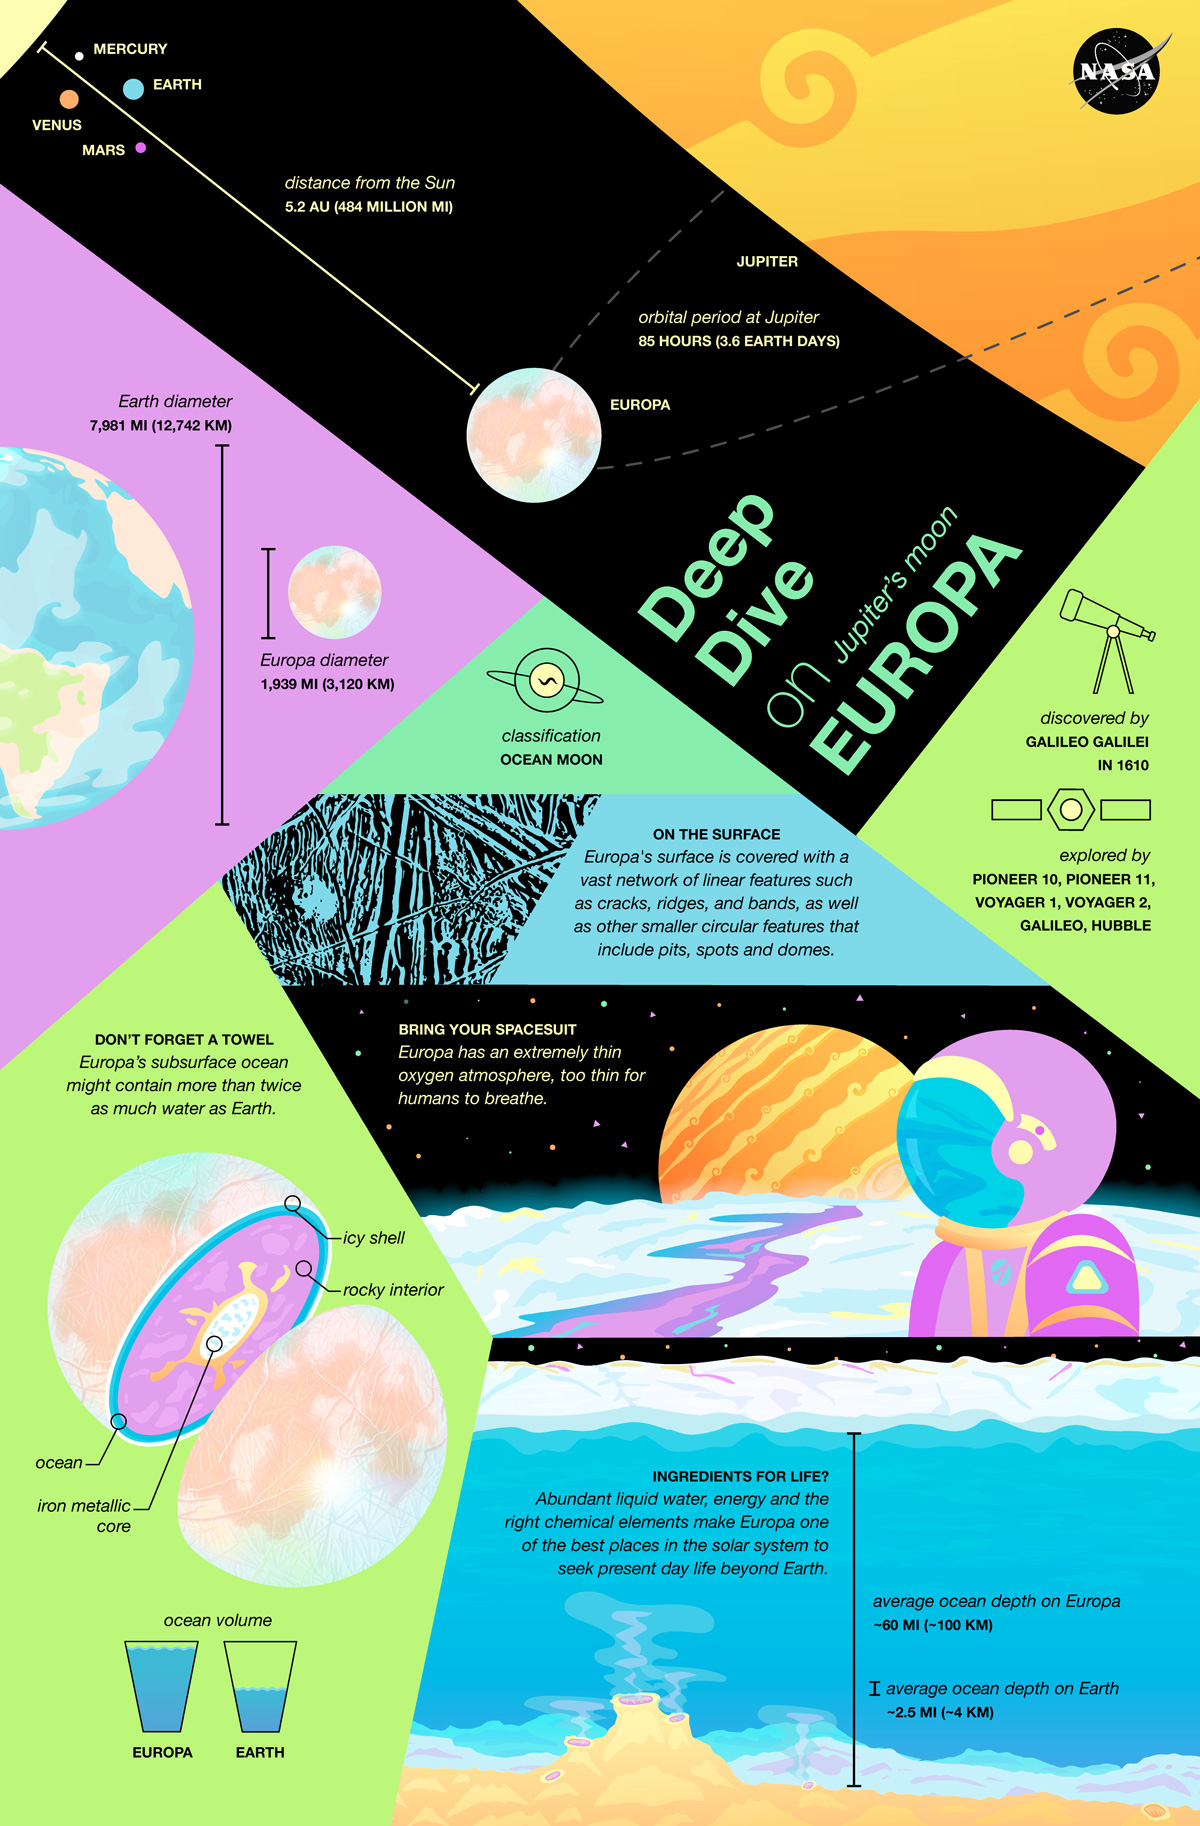 infographic illustrating various facts about Europa including its discovery, size, surface, interior, and ocean depth